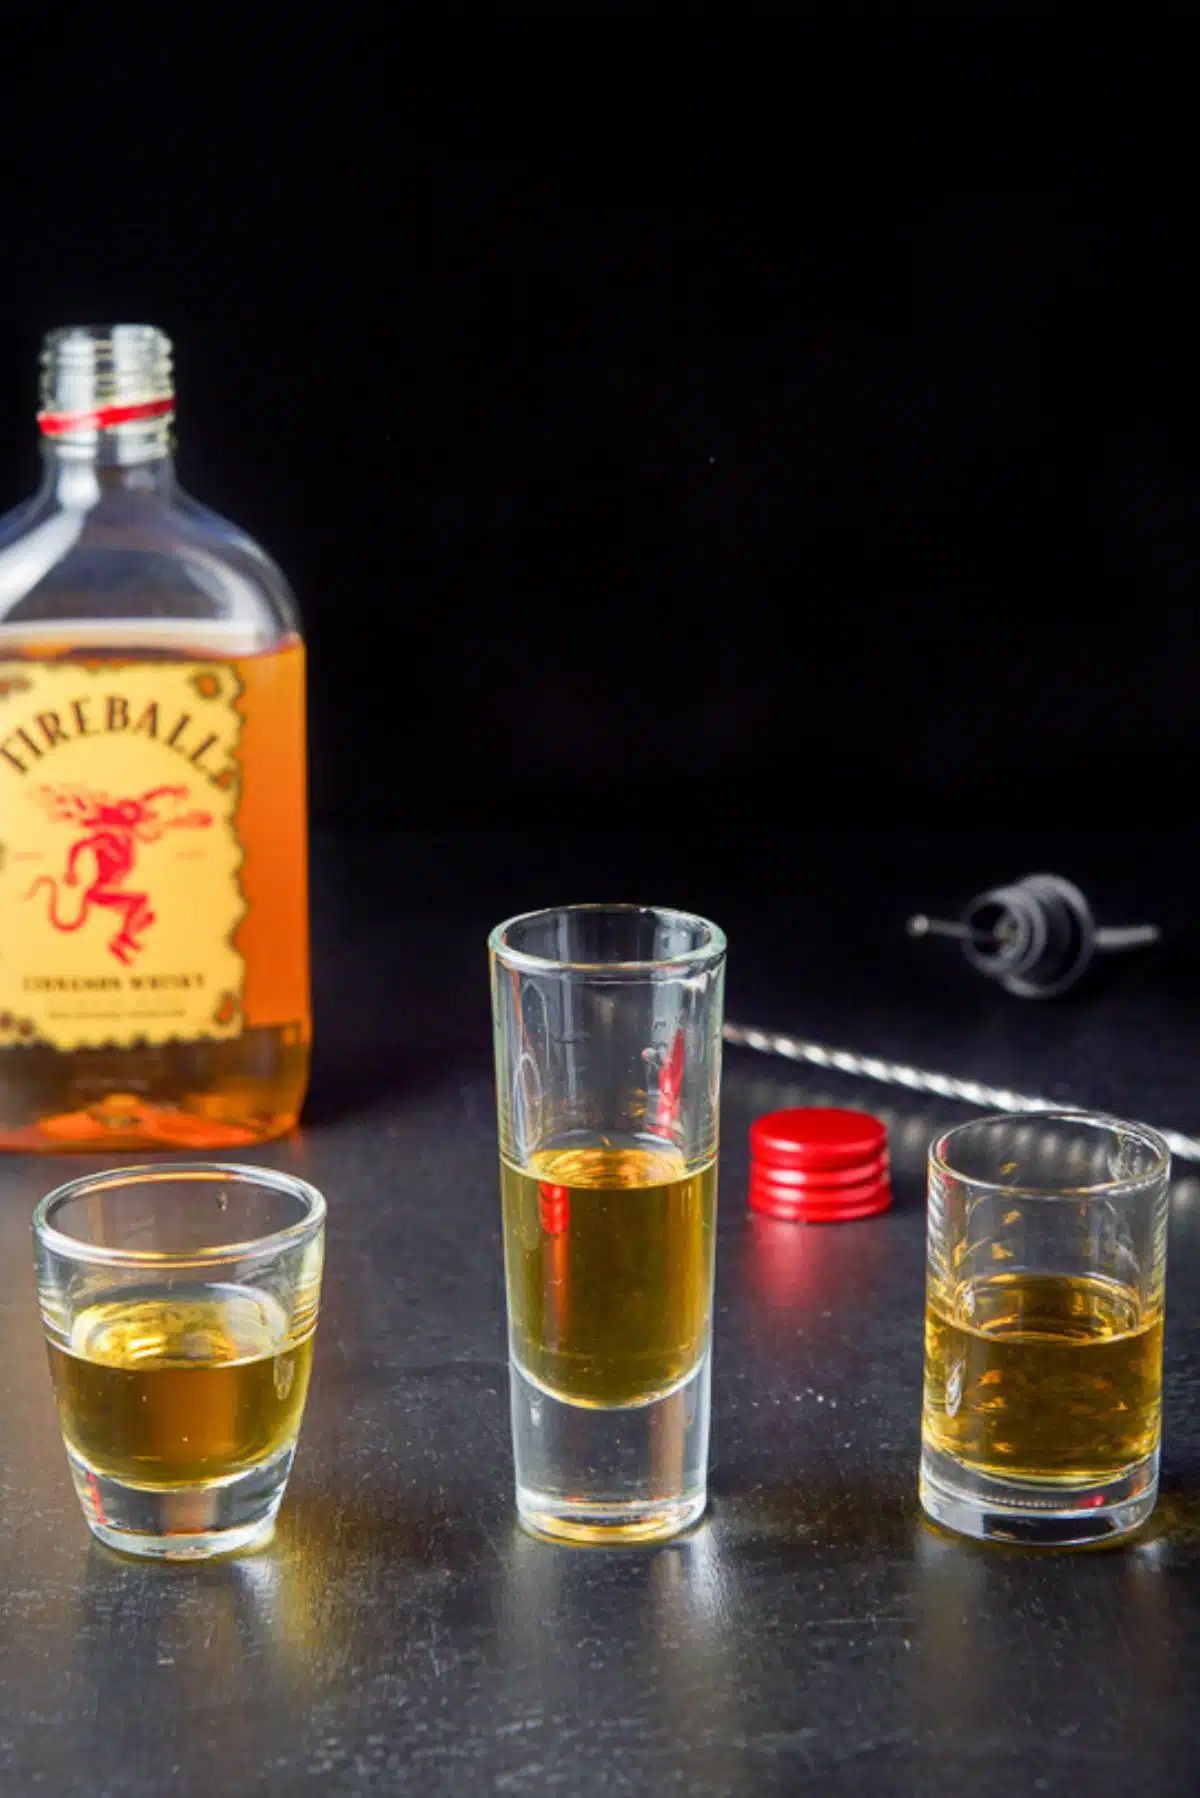 Fireball whiskey poured in the three shot glasses with the whiskey in the background